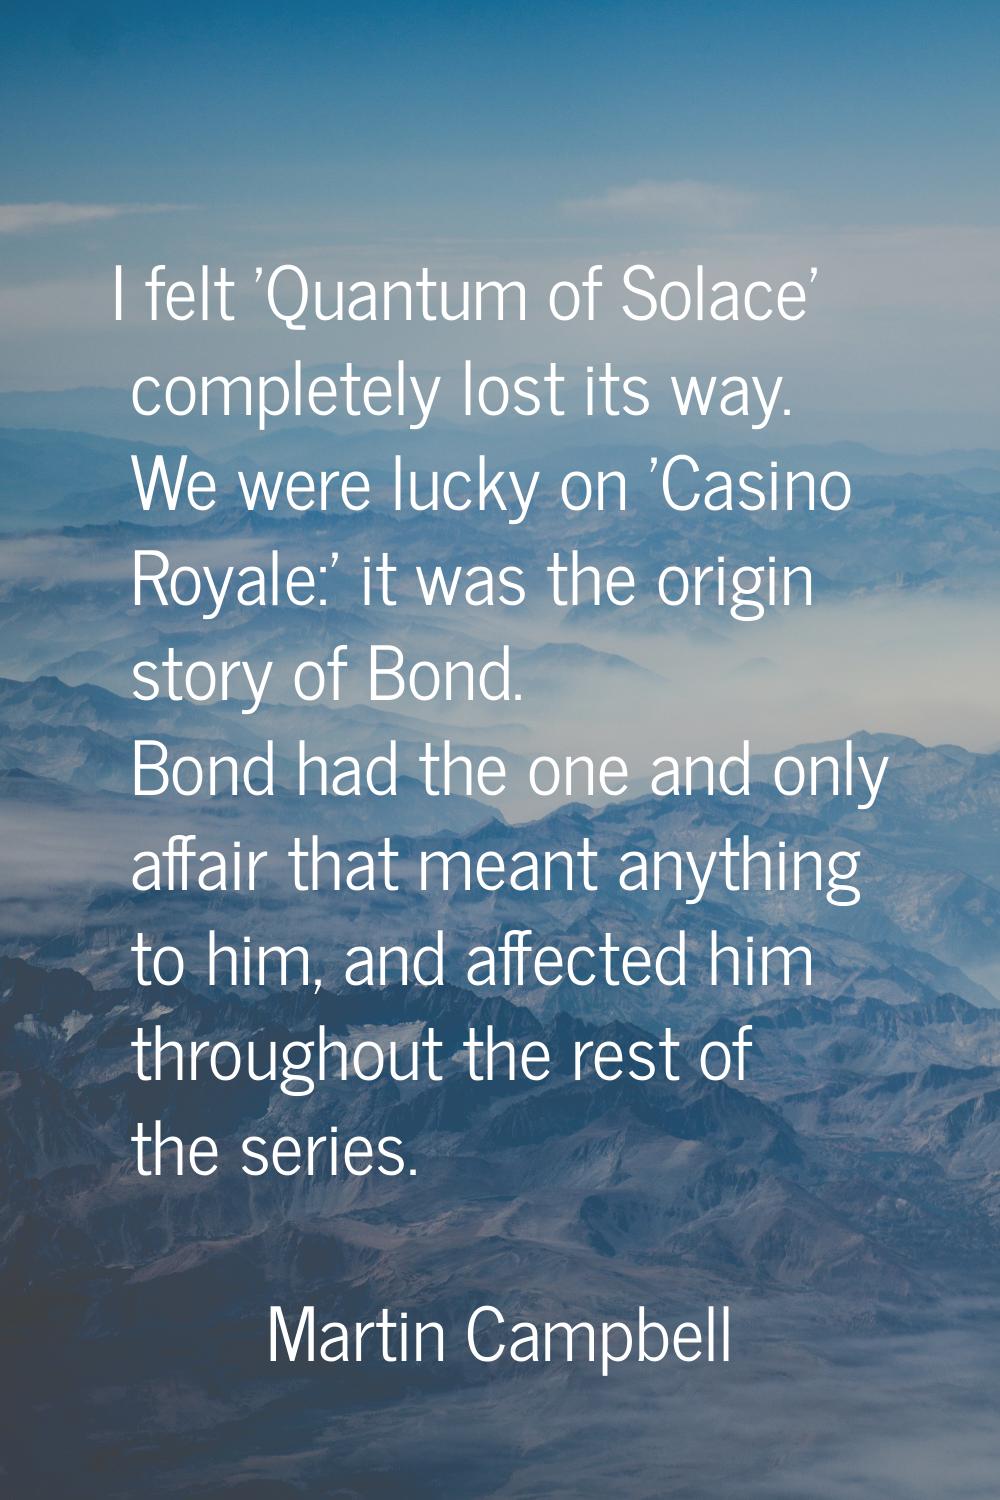 I felt 'Quantum of Solace' completely lost its way. We were lucky on 'Casino Royale:' it was the or